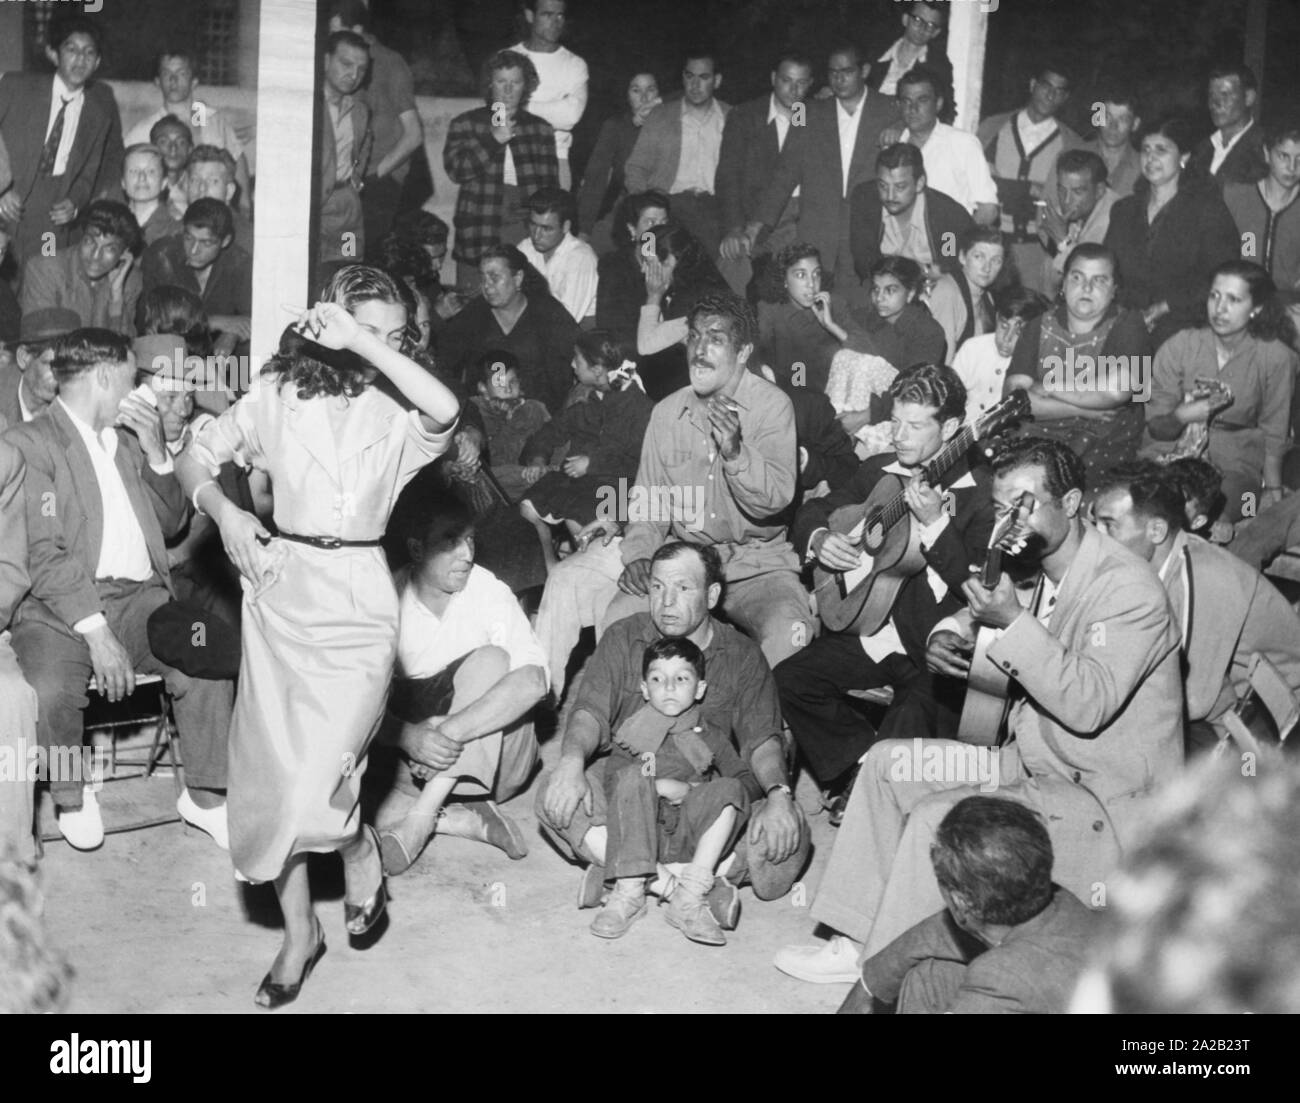 Every May, Sinti and Roma from all over the world go on pilgrimage to Les Saintes Maries de la Mer, southern France, to worship their patron saint, Saint Sara. Here, Sinti and Roma while playing music and dancing. Undated photo, probably from the 1950s. Stock Photo